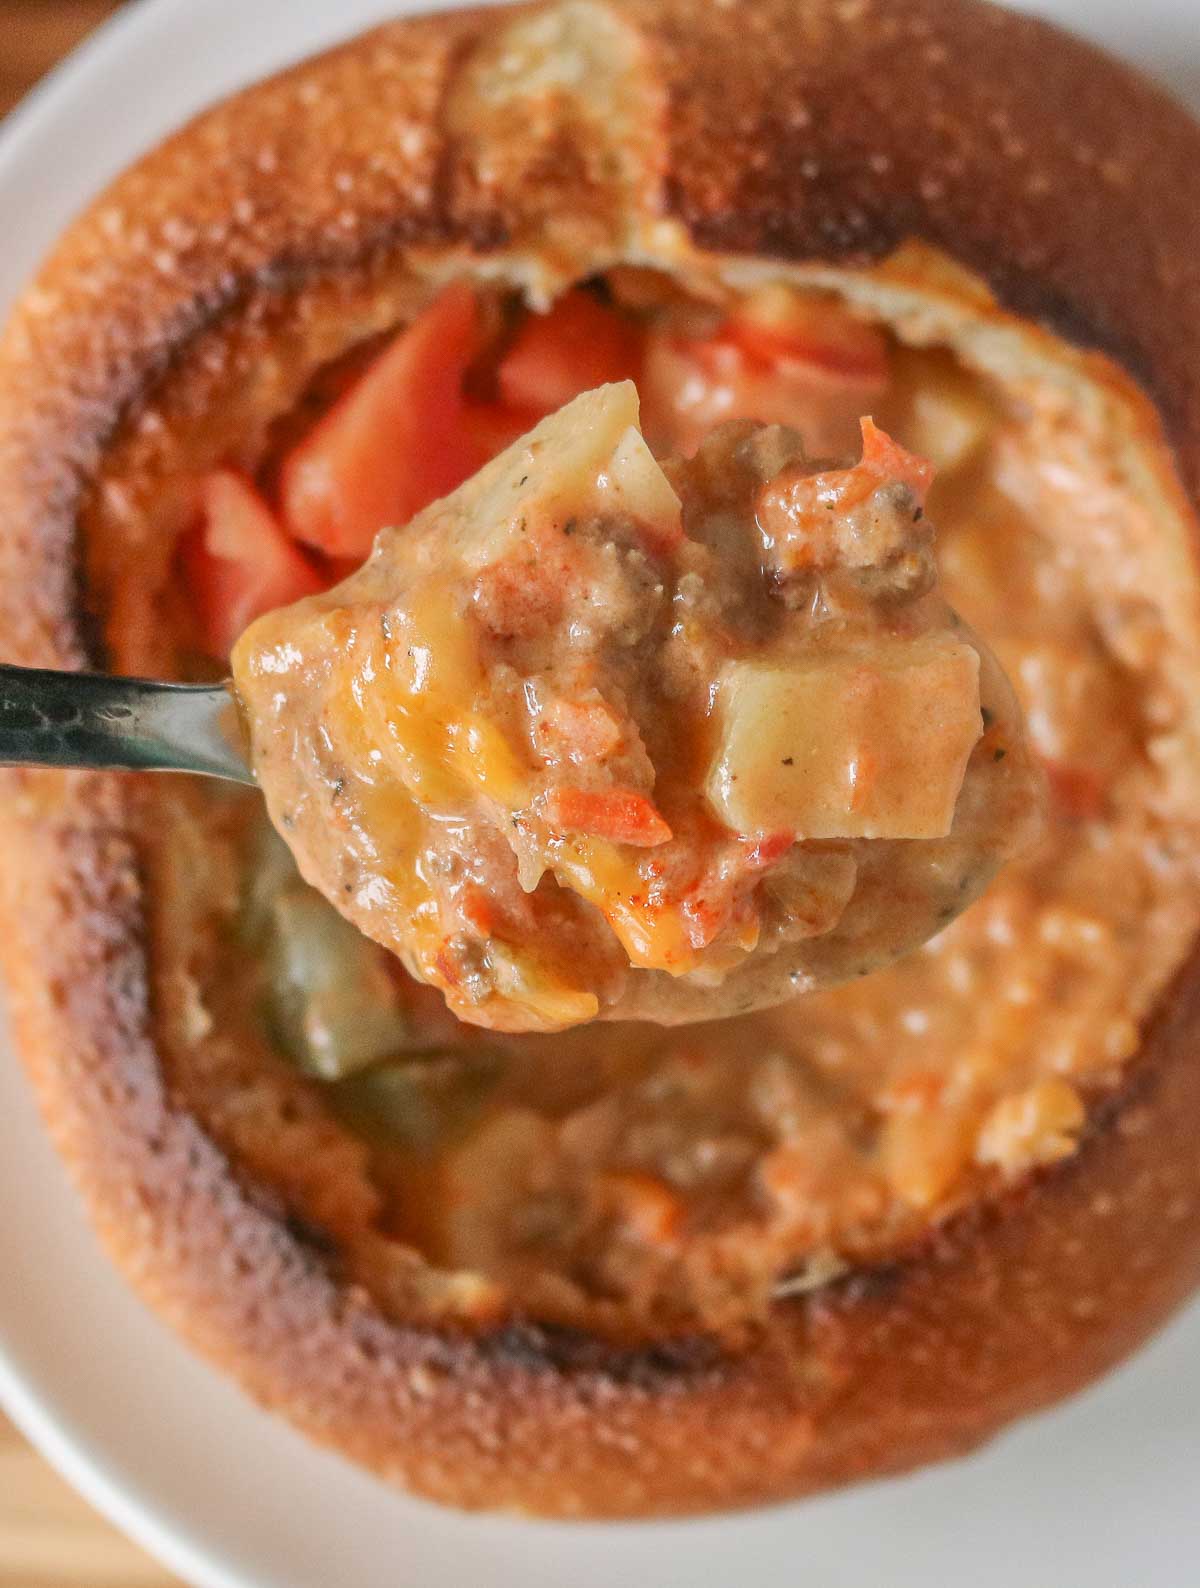 Spoonful of cheeseburger soup from a bread bowl.